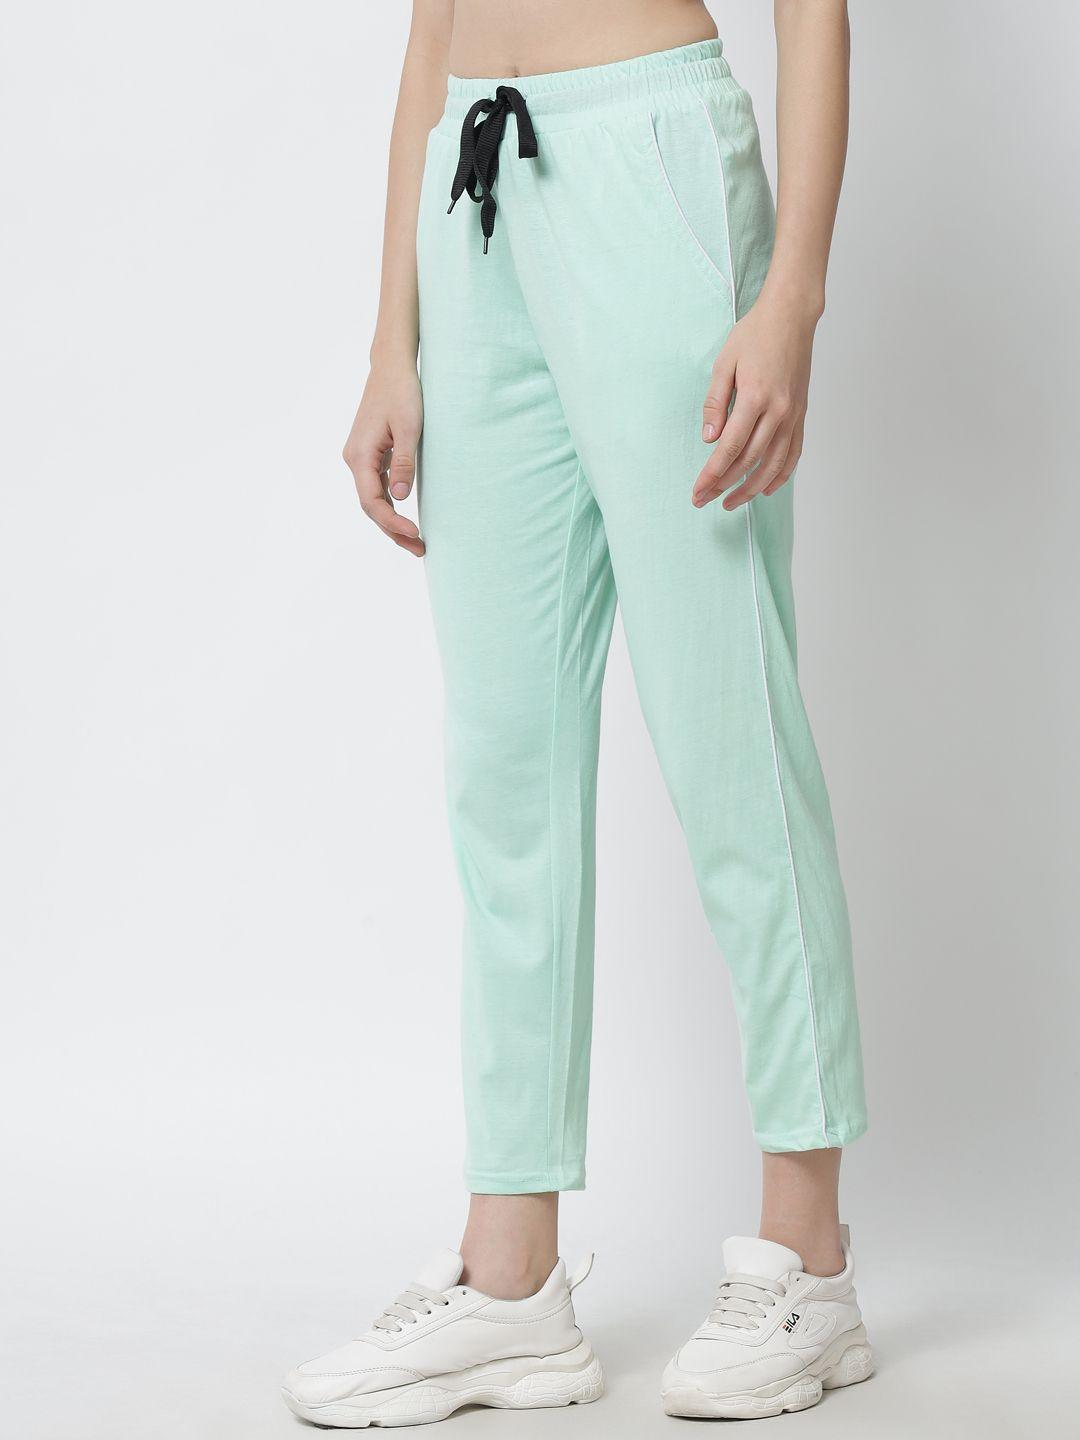 q-rious women sea green solid cotton track pants